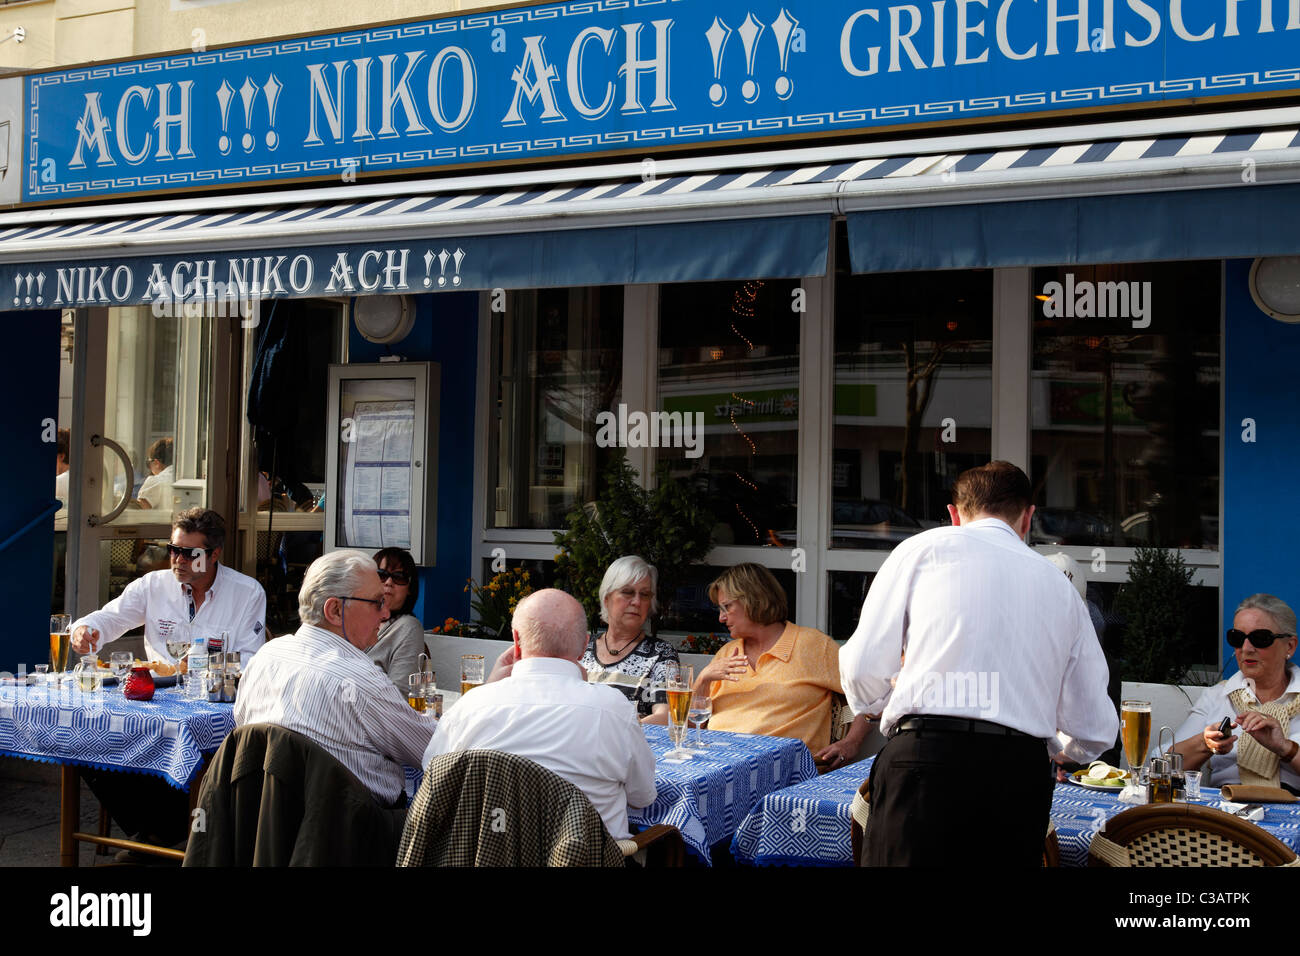 Berlin Greek High Resolution Stock Photography and Images - Alamy